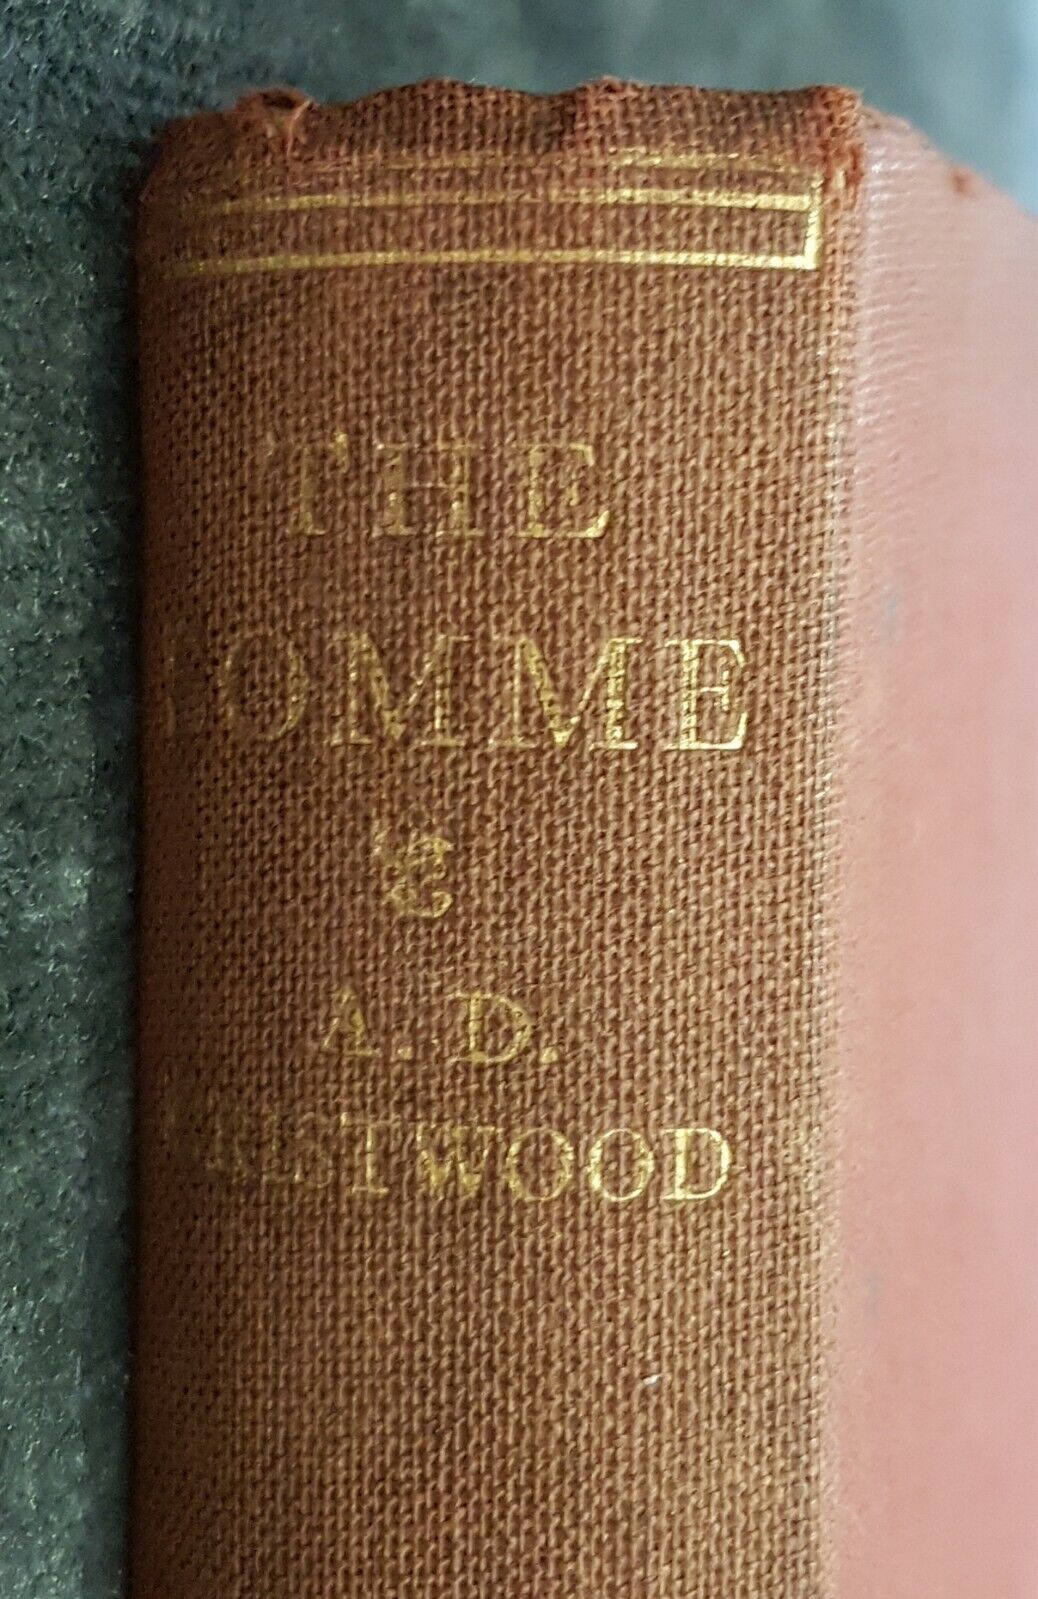 1927 1st Edition of The Somme by A. D. GRISTWOOD, WW1. Preface by H. G. WELLS 